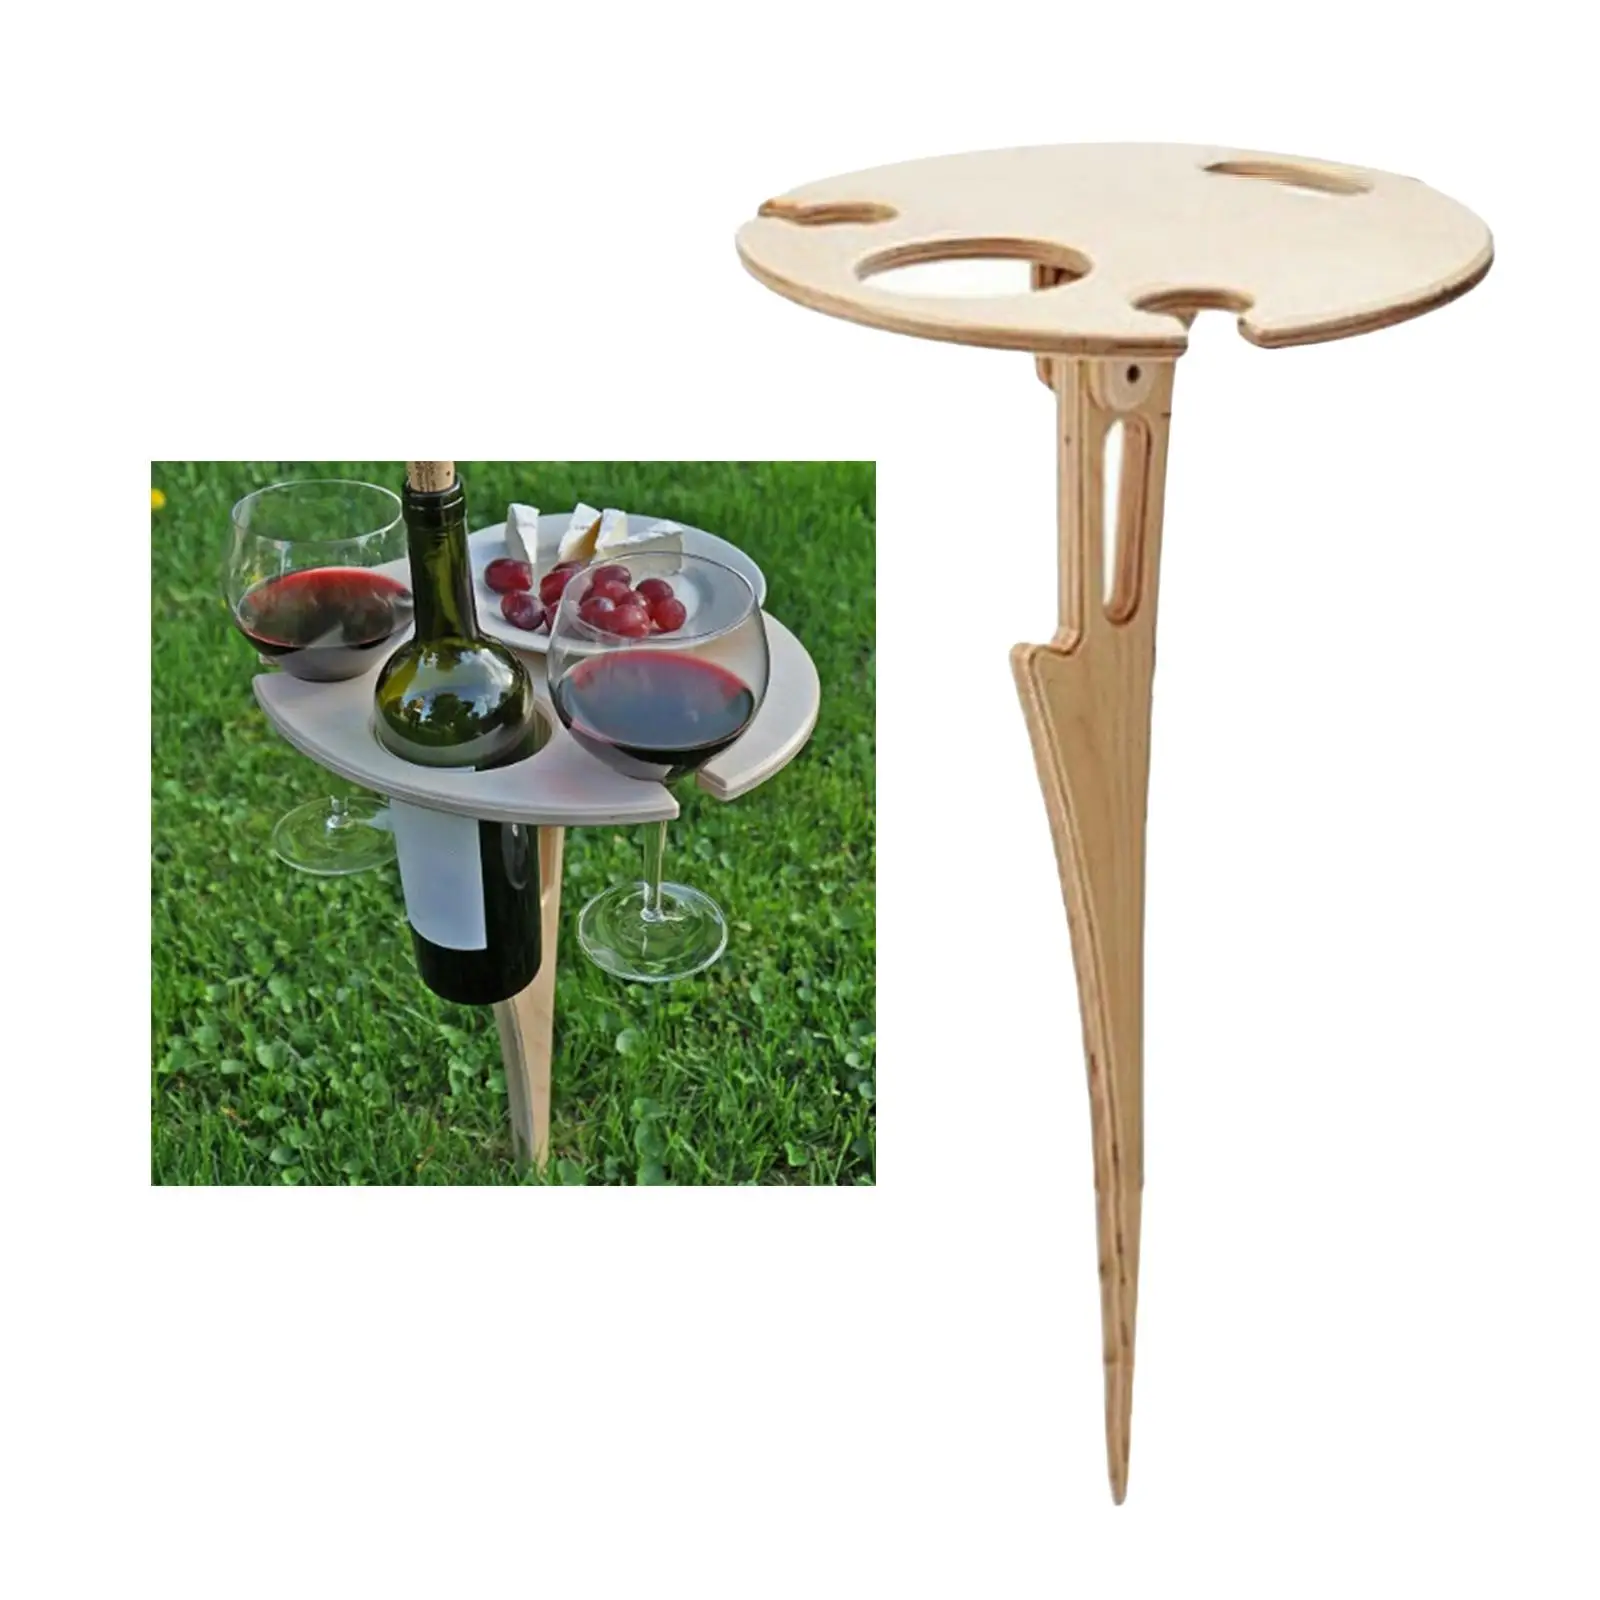 Outdoor Table Camping Trip Glass Holder 30x20cm Garden Lawn Snack